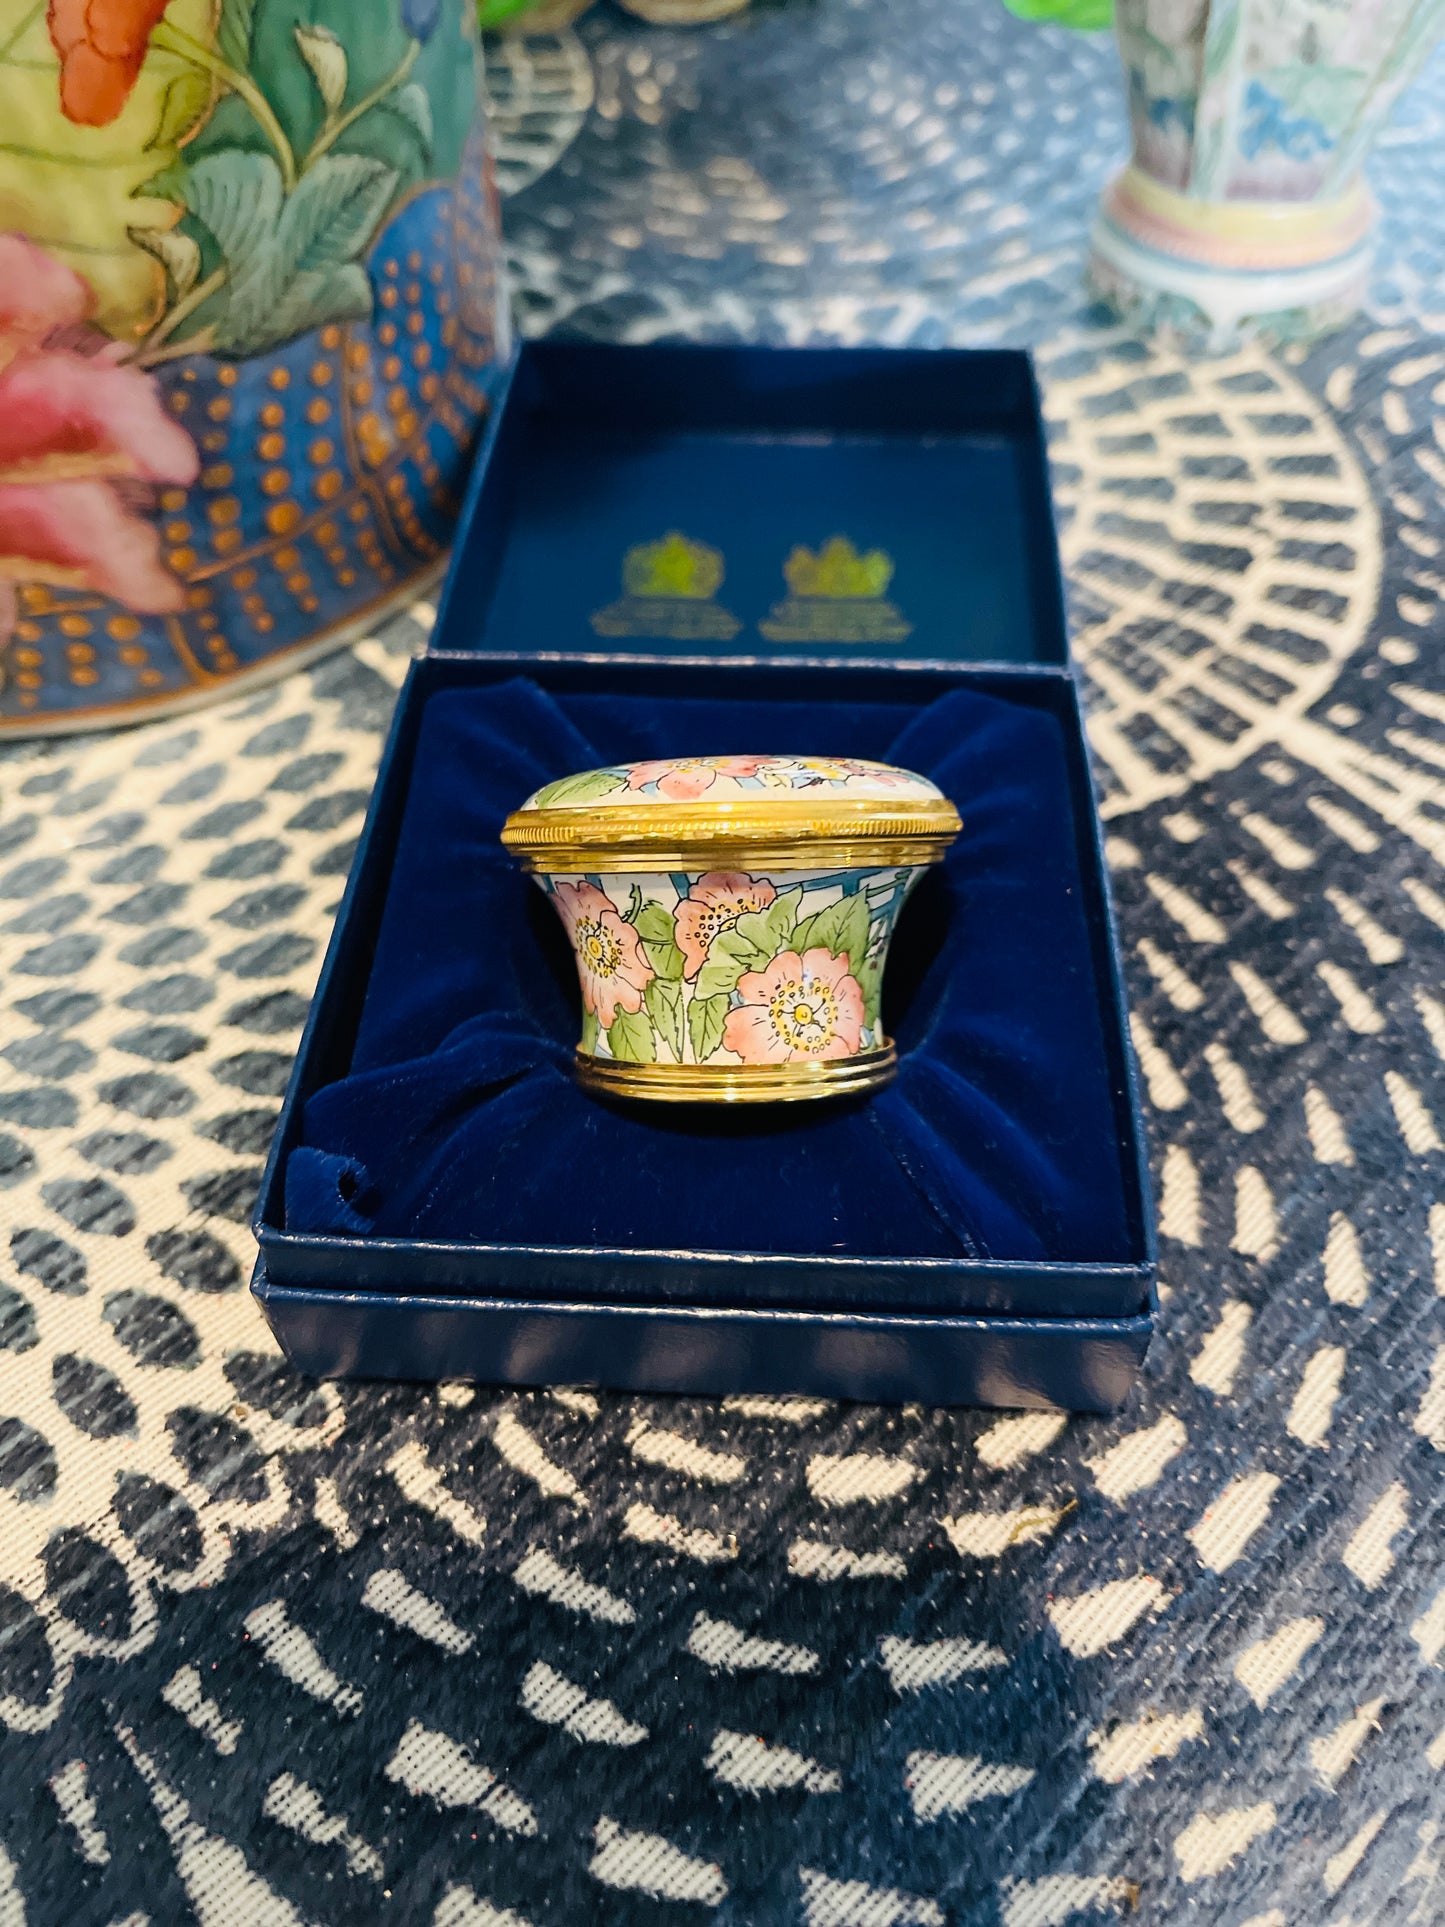 Vintage Halcyon Days Enamel Box with Pink and Yellow Flowers Draped on a Blue Trellis, Made in England